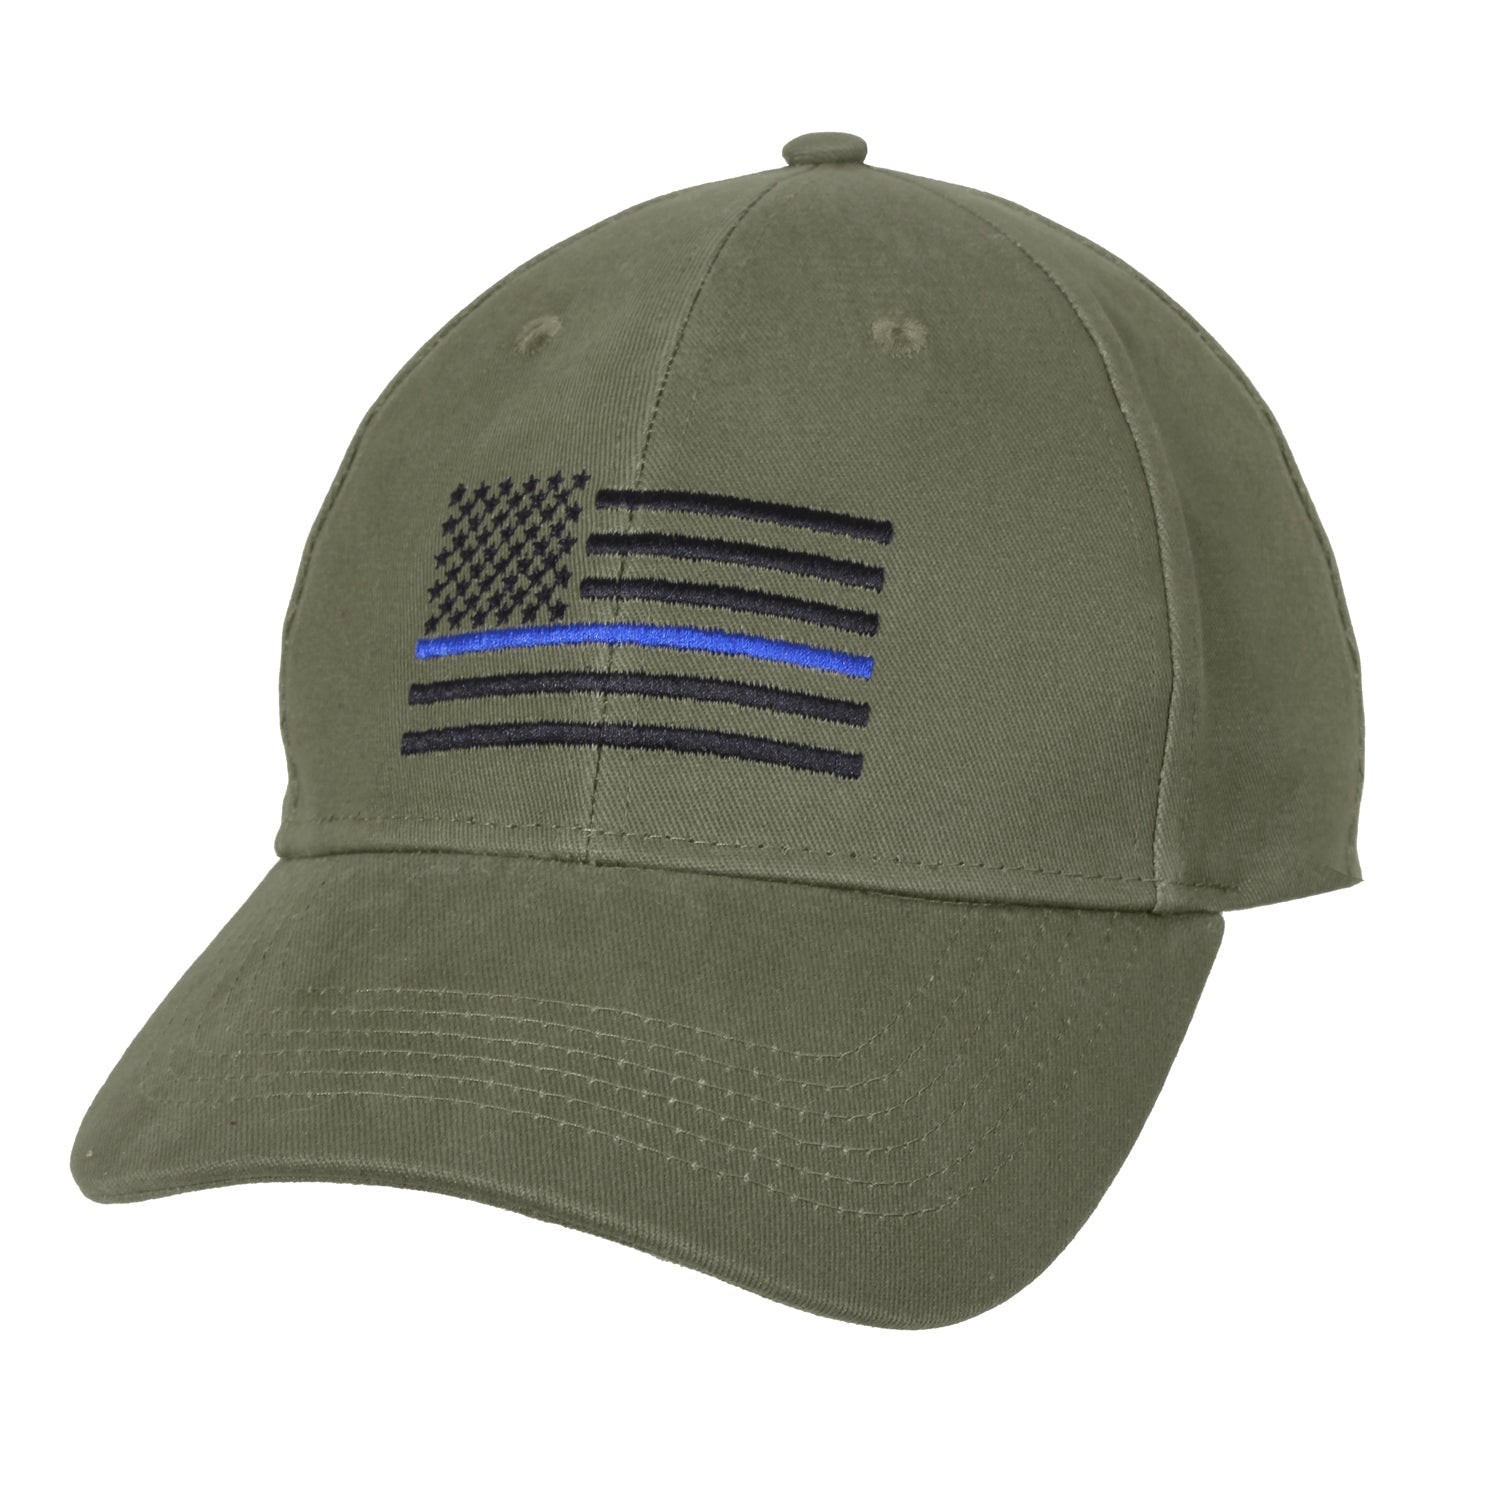 Rothco Thin Blue line Low Profile Cap Olive Drab (4425)